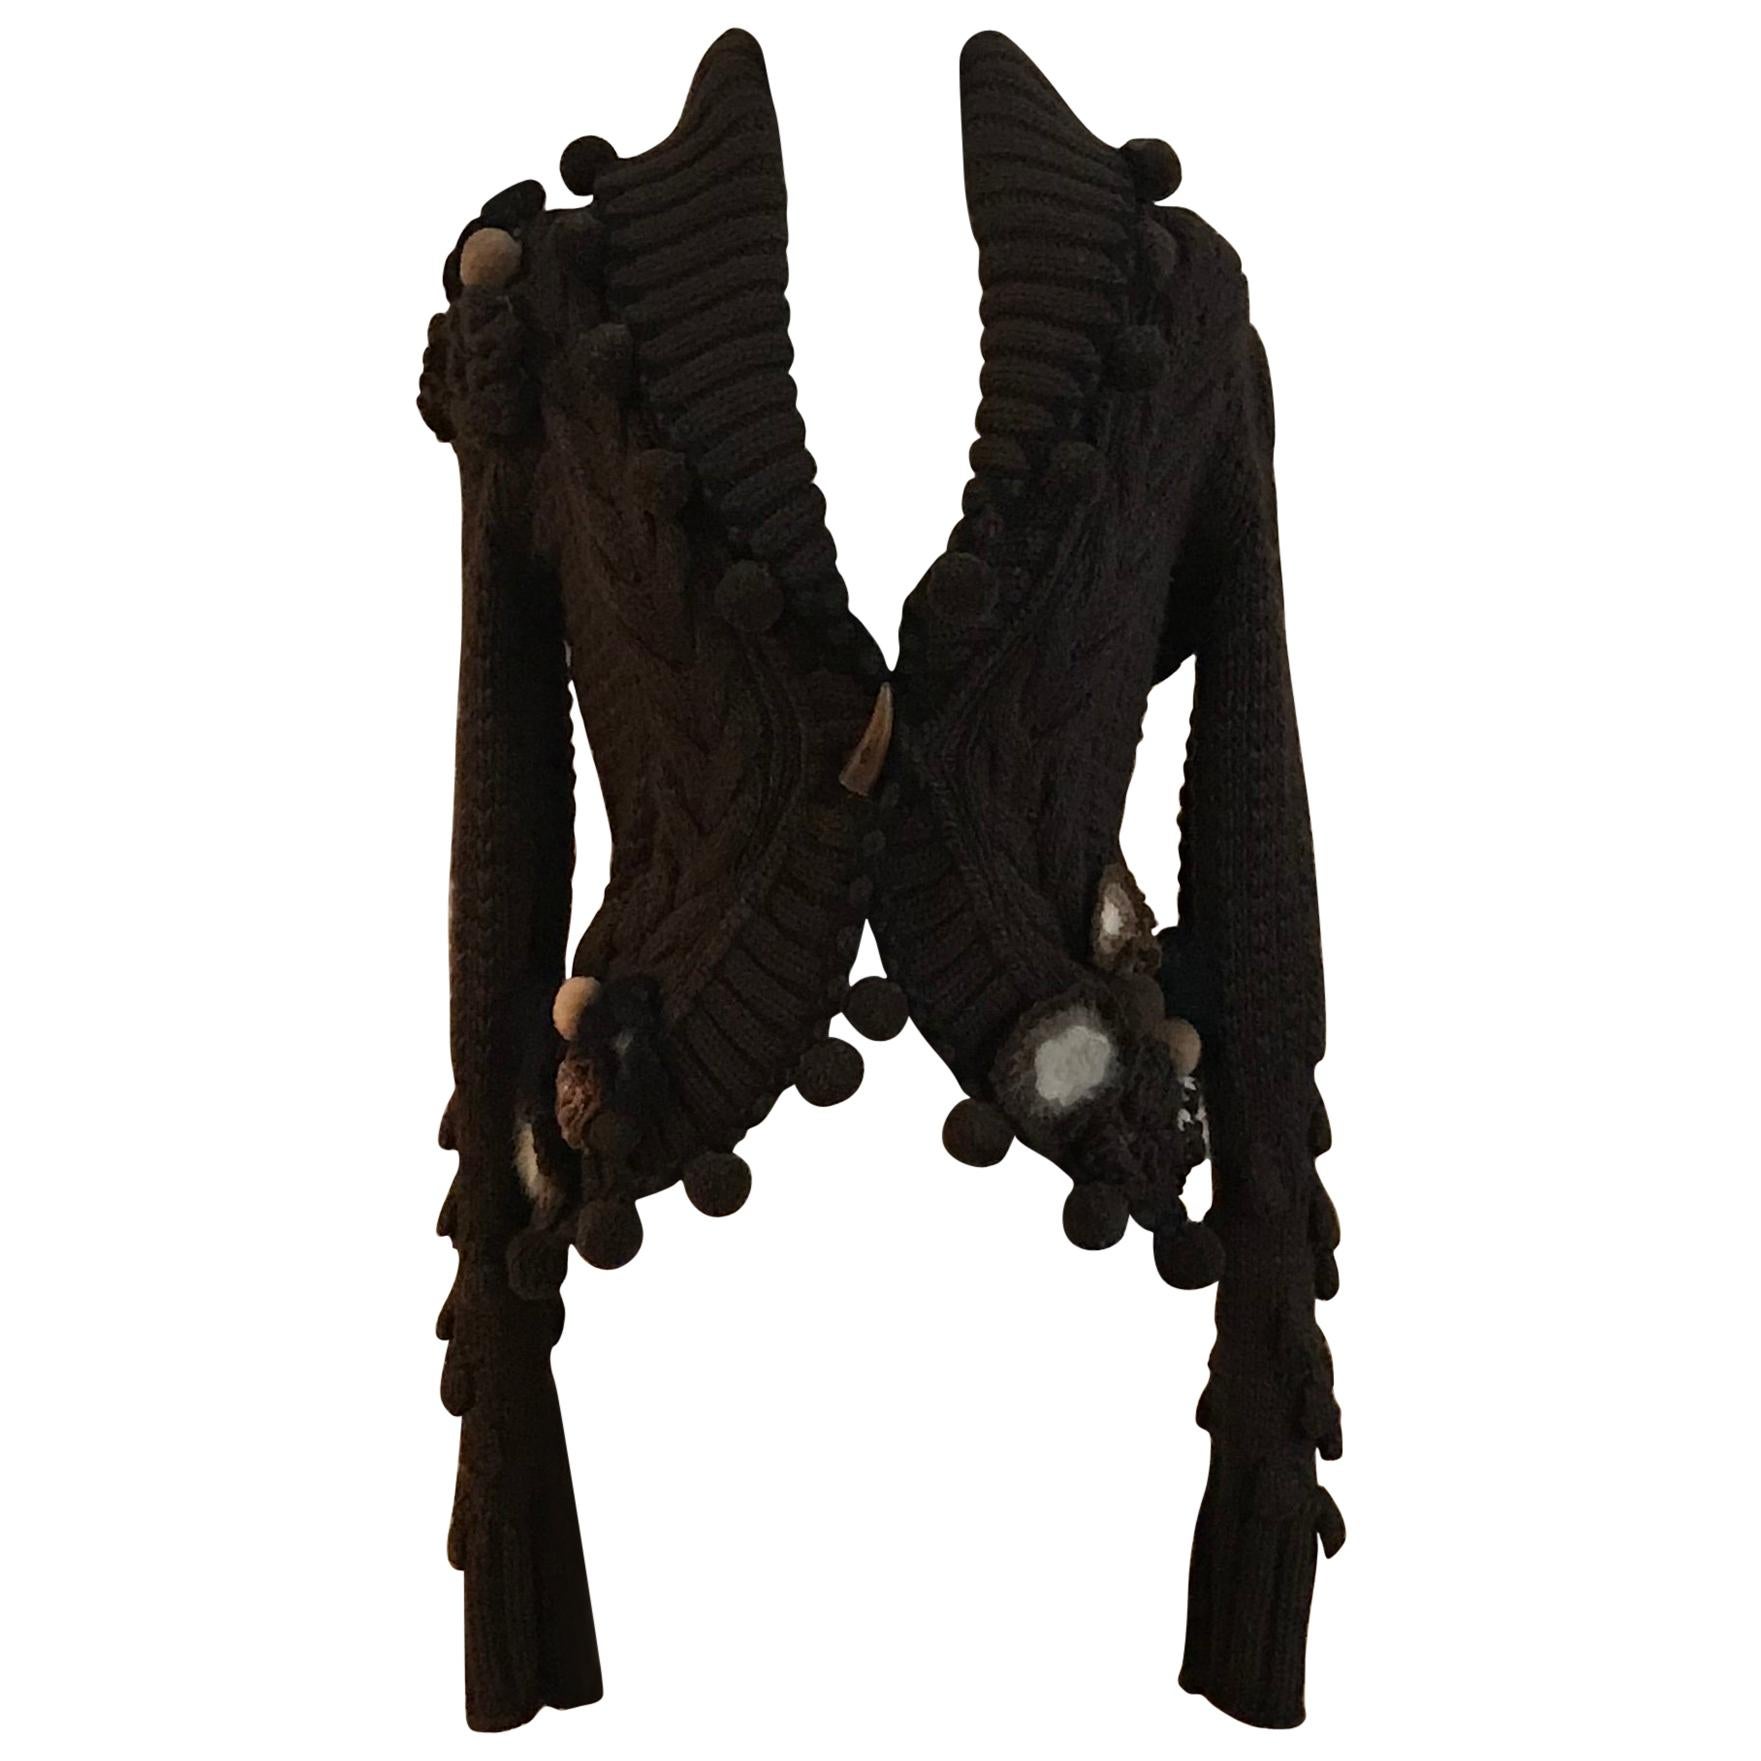 Alexander McQueen 2005 Runway Chunky Knit Brown Floral Detail Pom Pom Sweater 